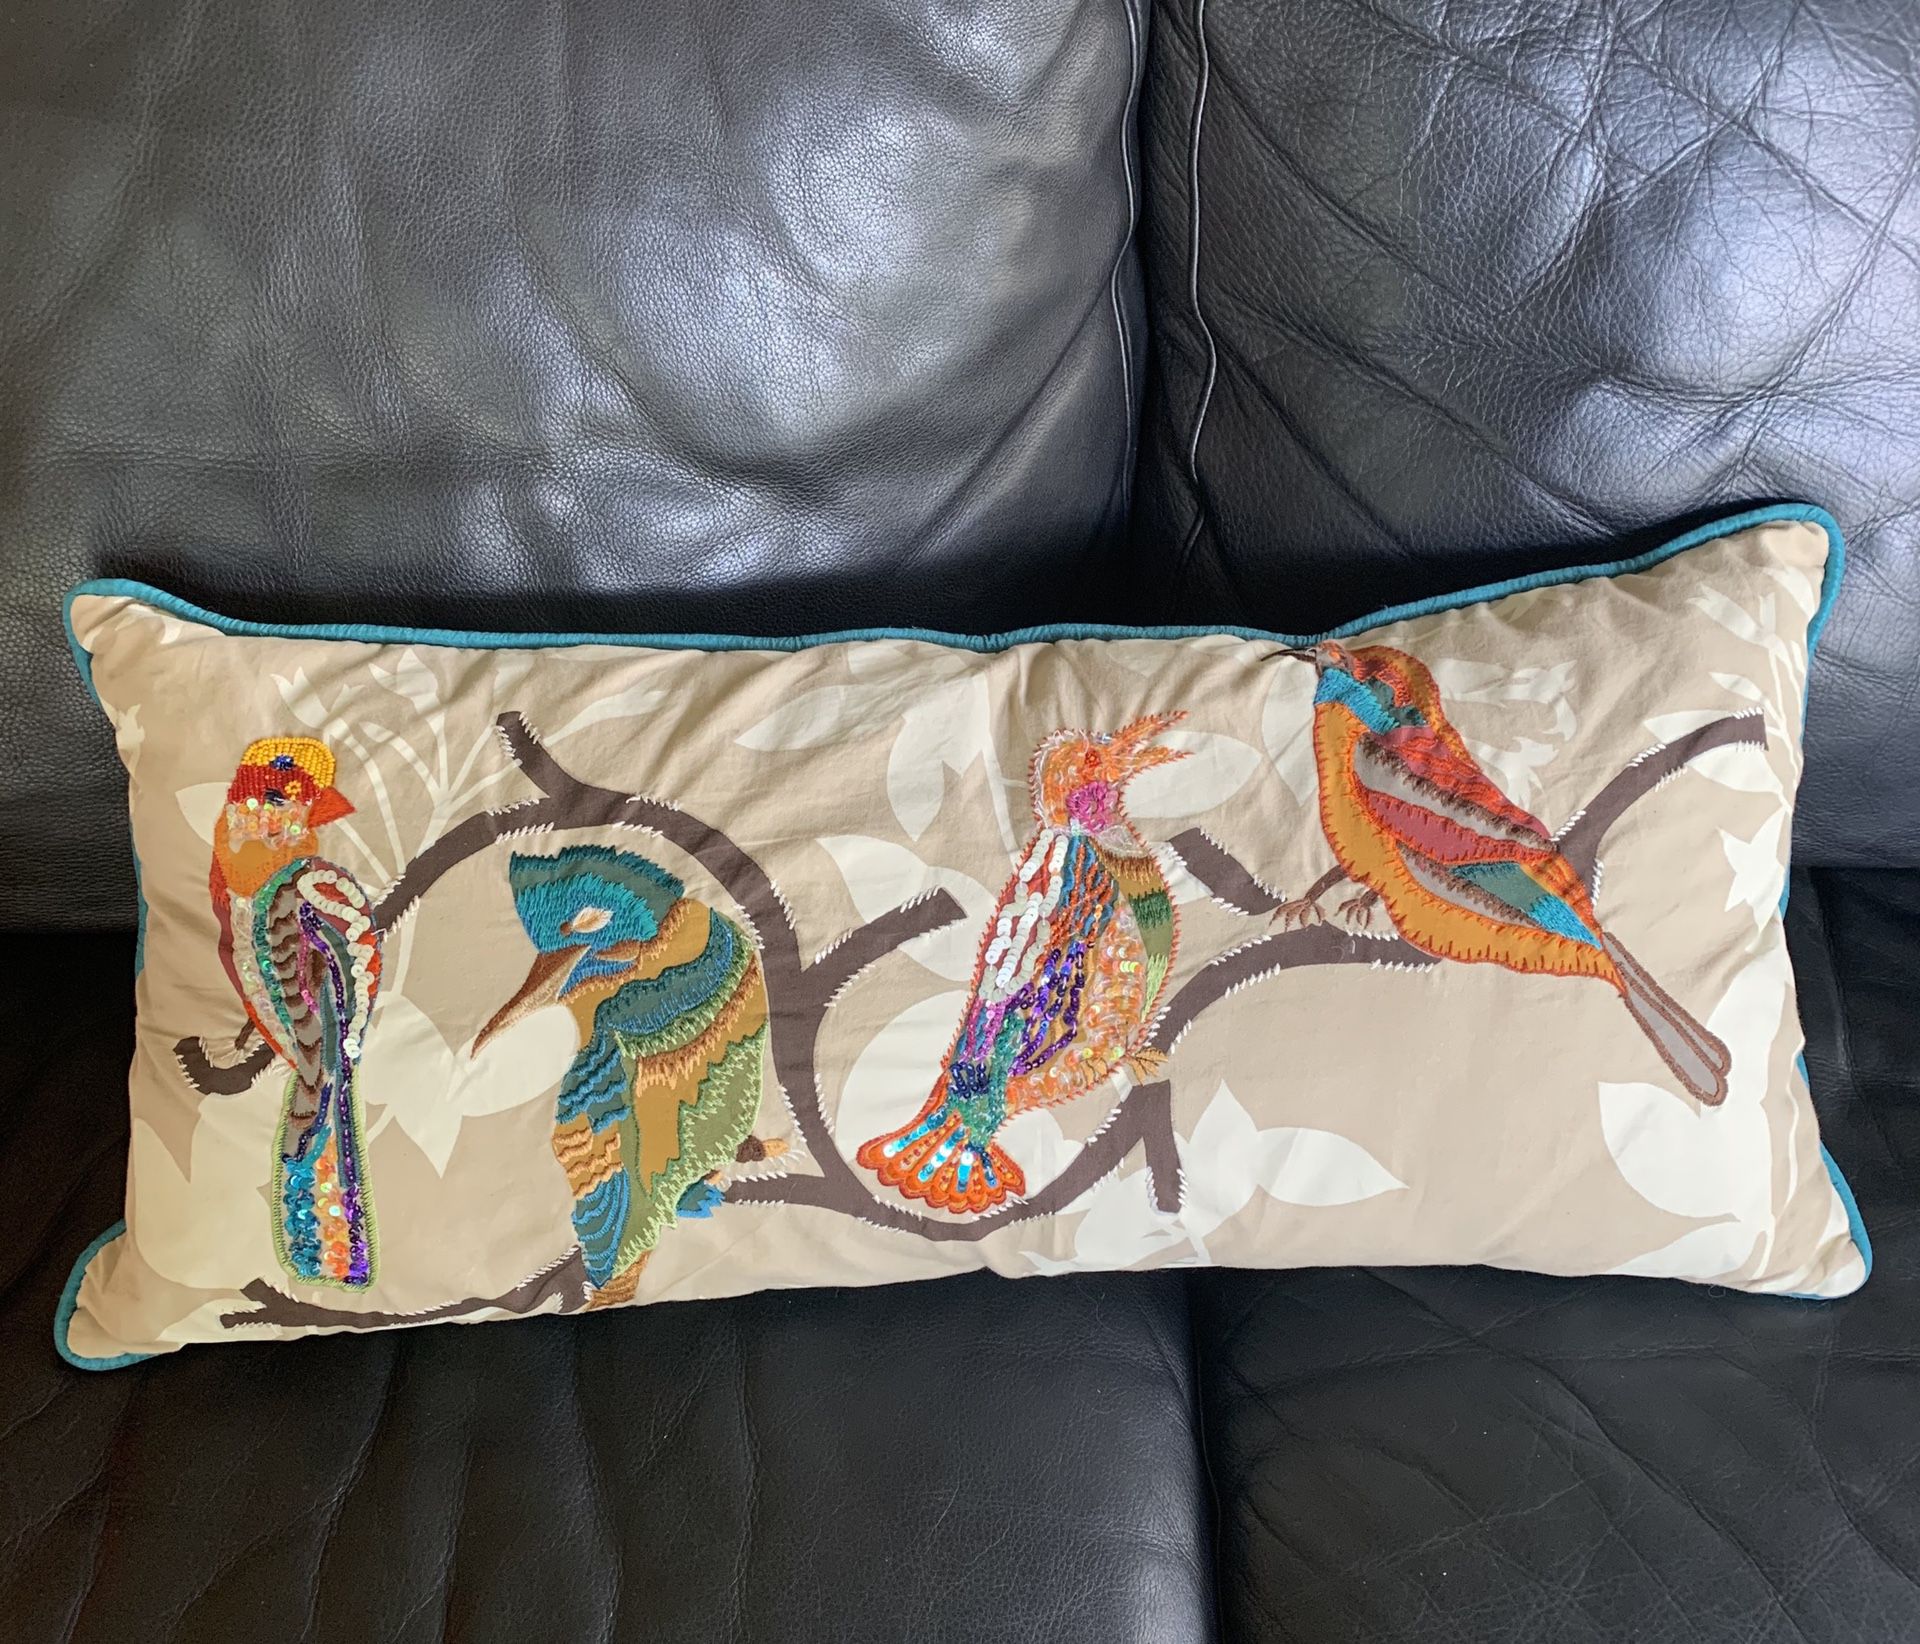 Pier One bolster pillow birds embroidered